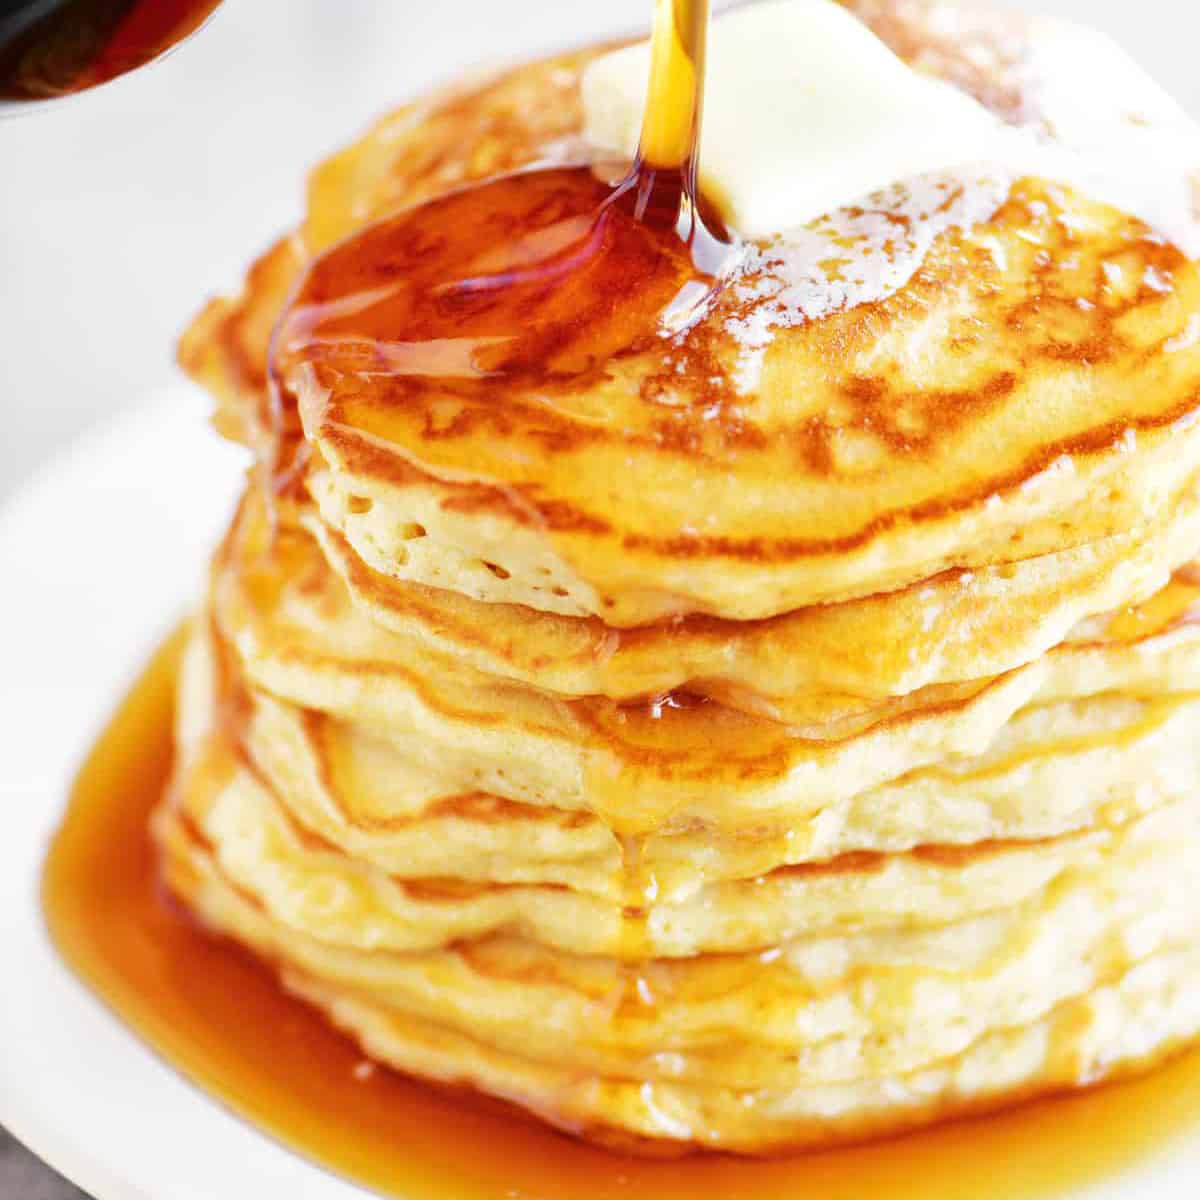 a stack of pancakes with syrup being poured onto them.